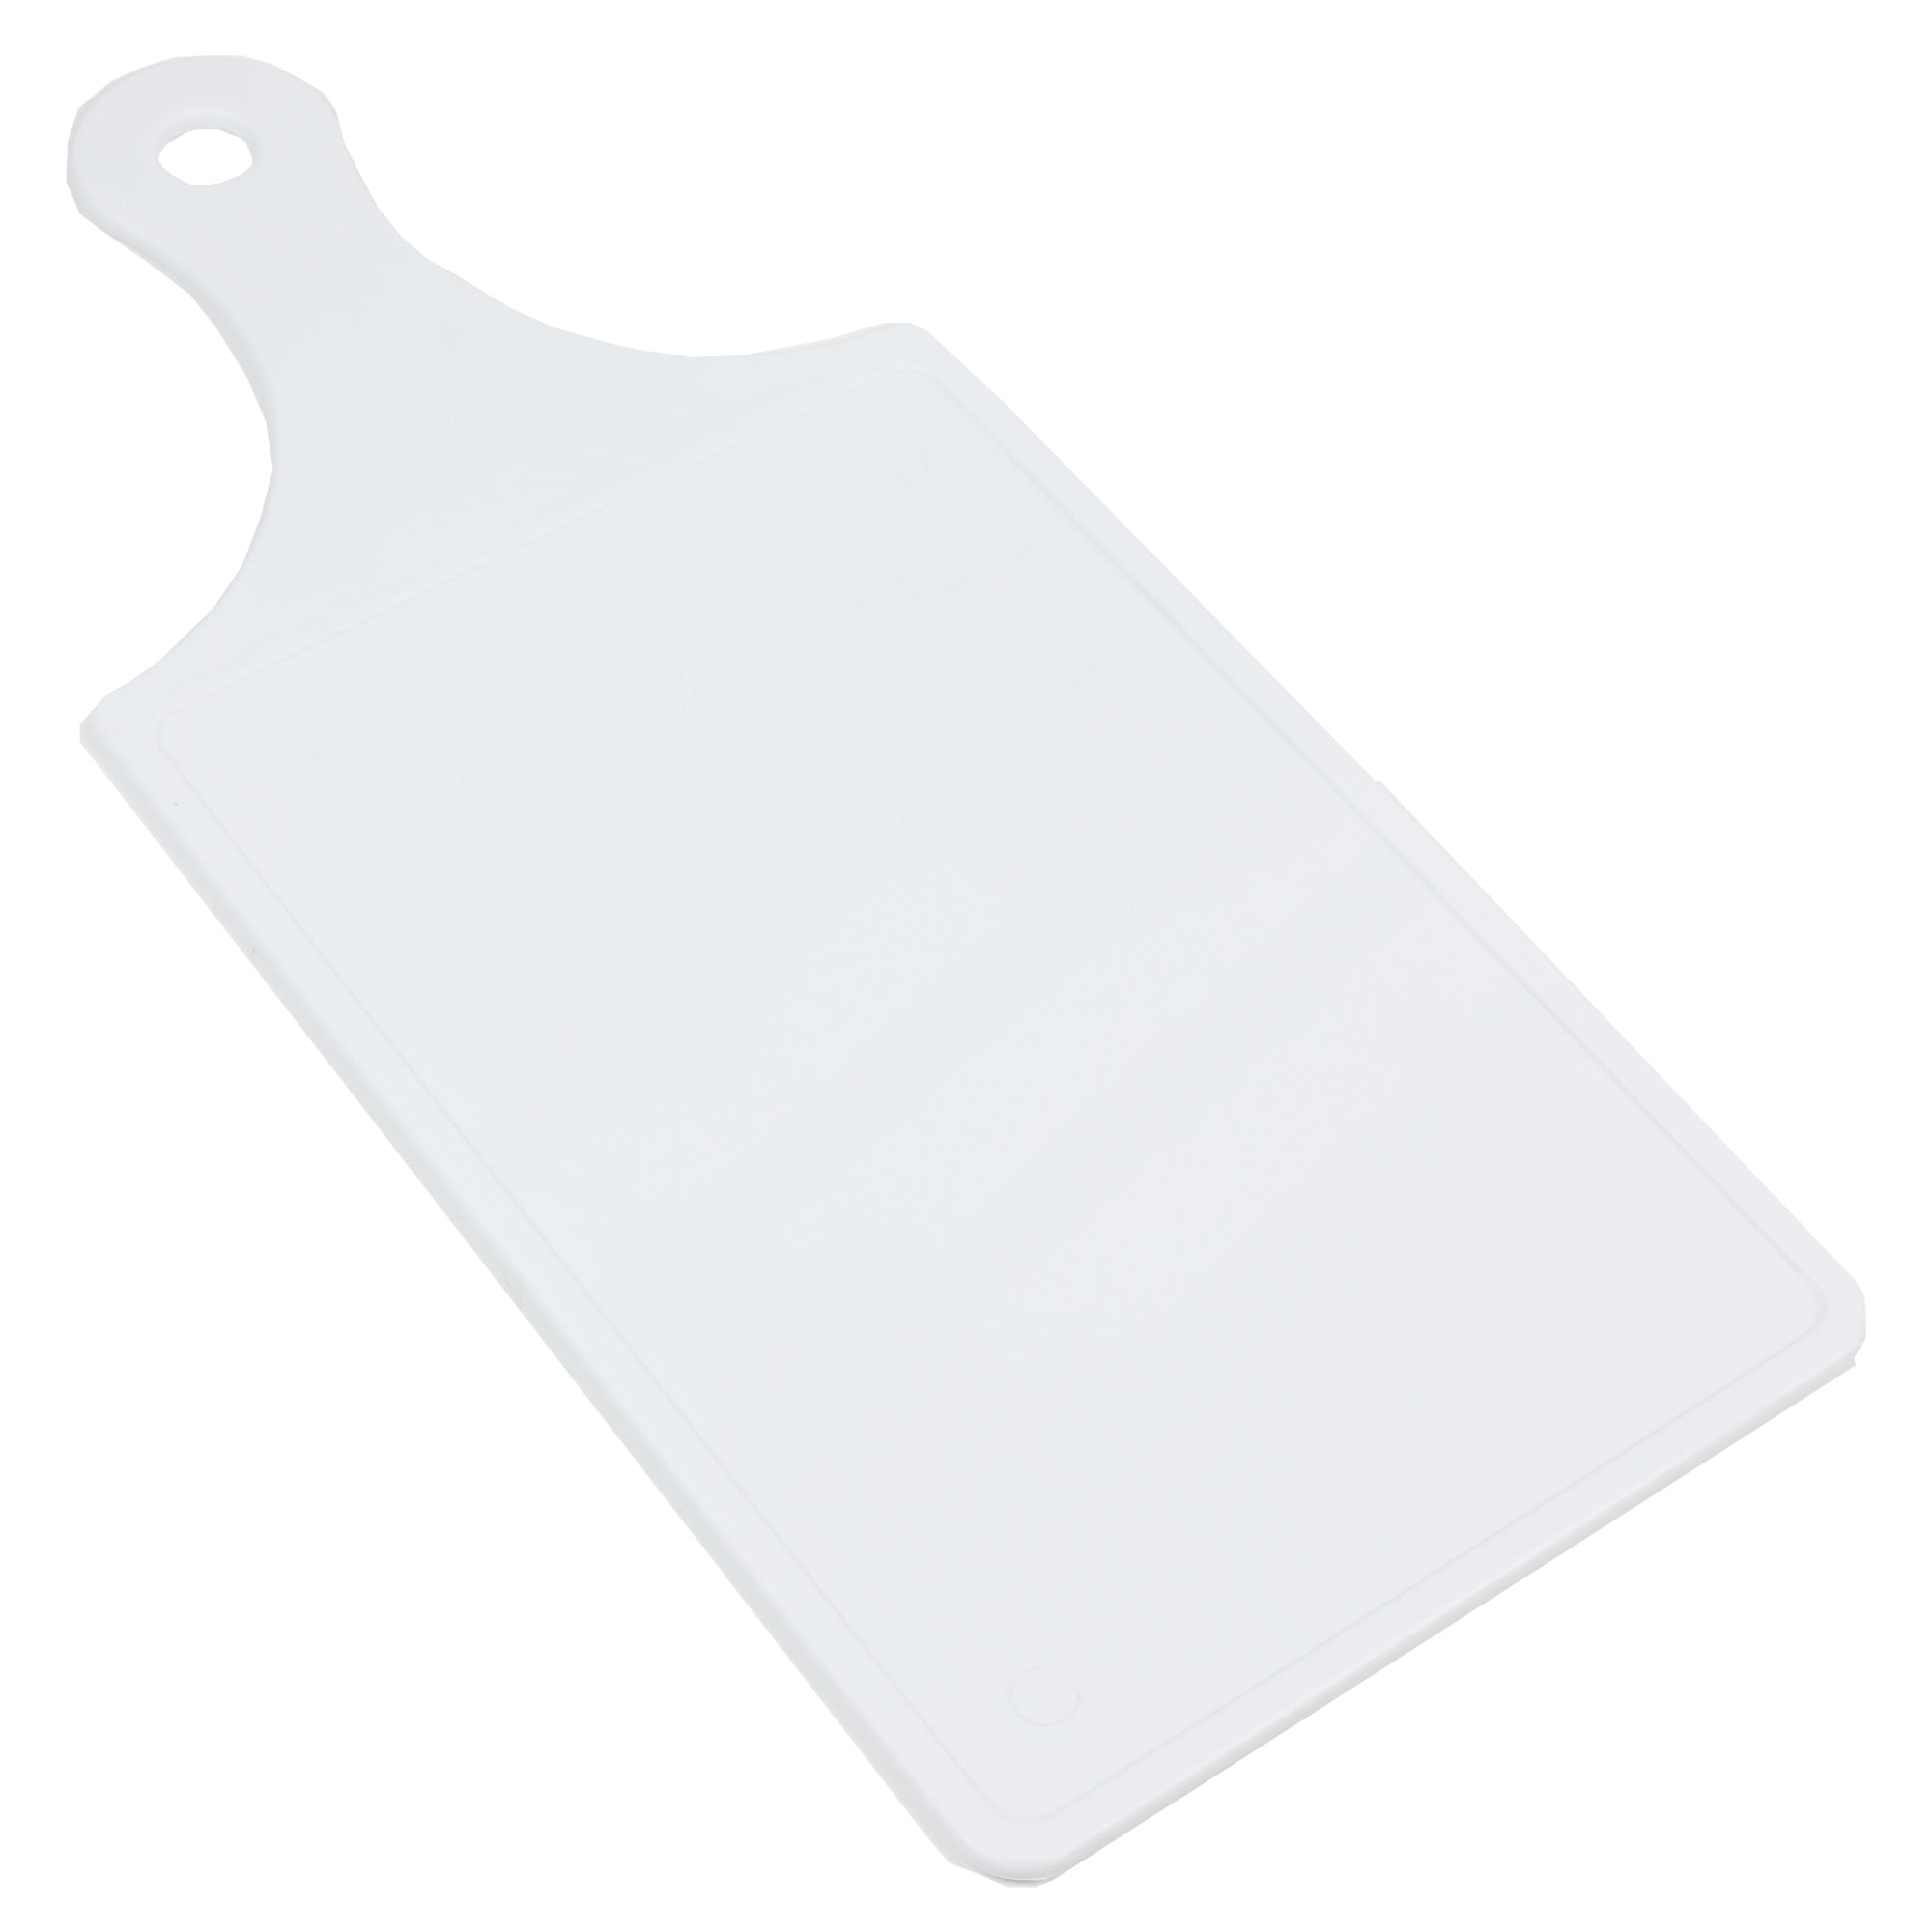 Chef Craft Basic Plastic Ice Cream Paddle, 9 inches in length, White